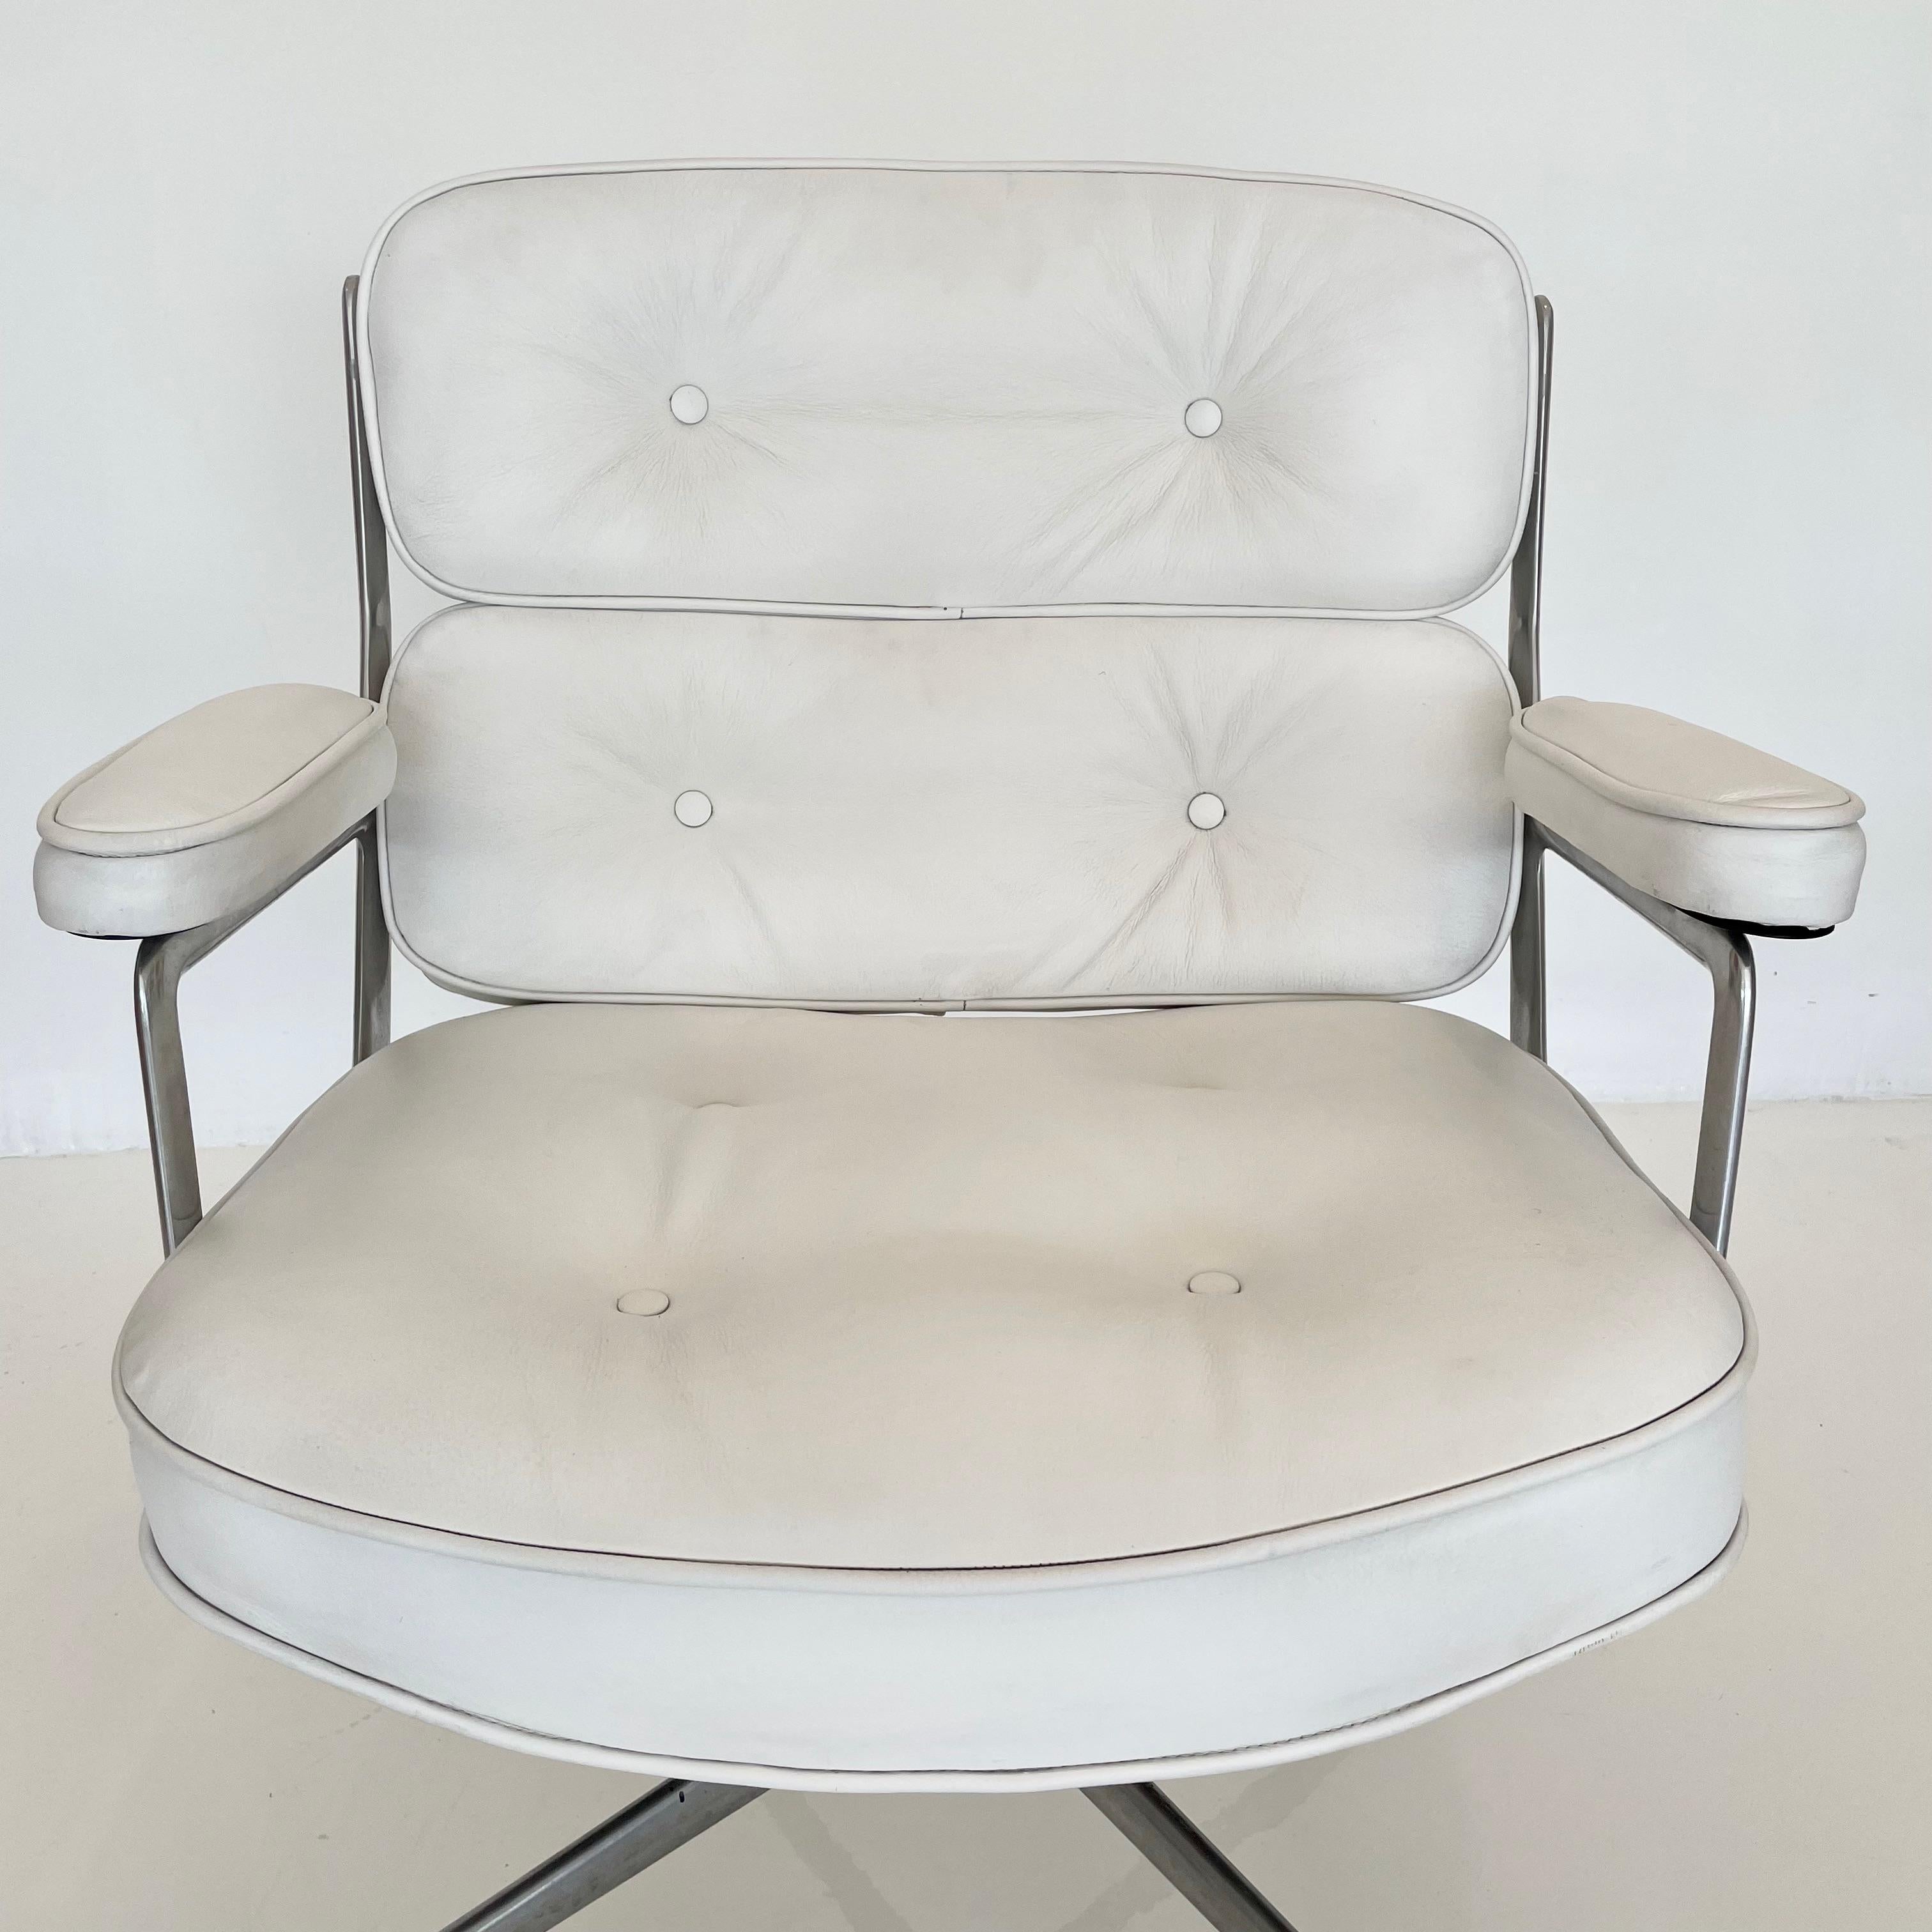 Classic Eames time life swivel chair in white leather. Unusual color. Chair swivels and reclines. Good vintage condition to metal and leather. Height adjustable with tilt back mechanism. Offered with original casters. The perfect vintage office